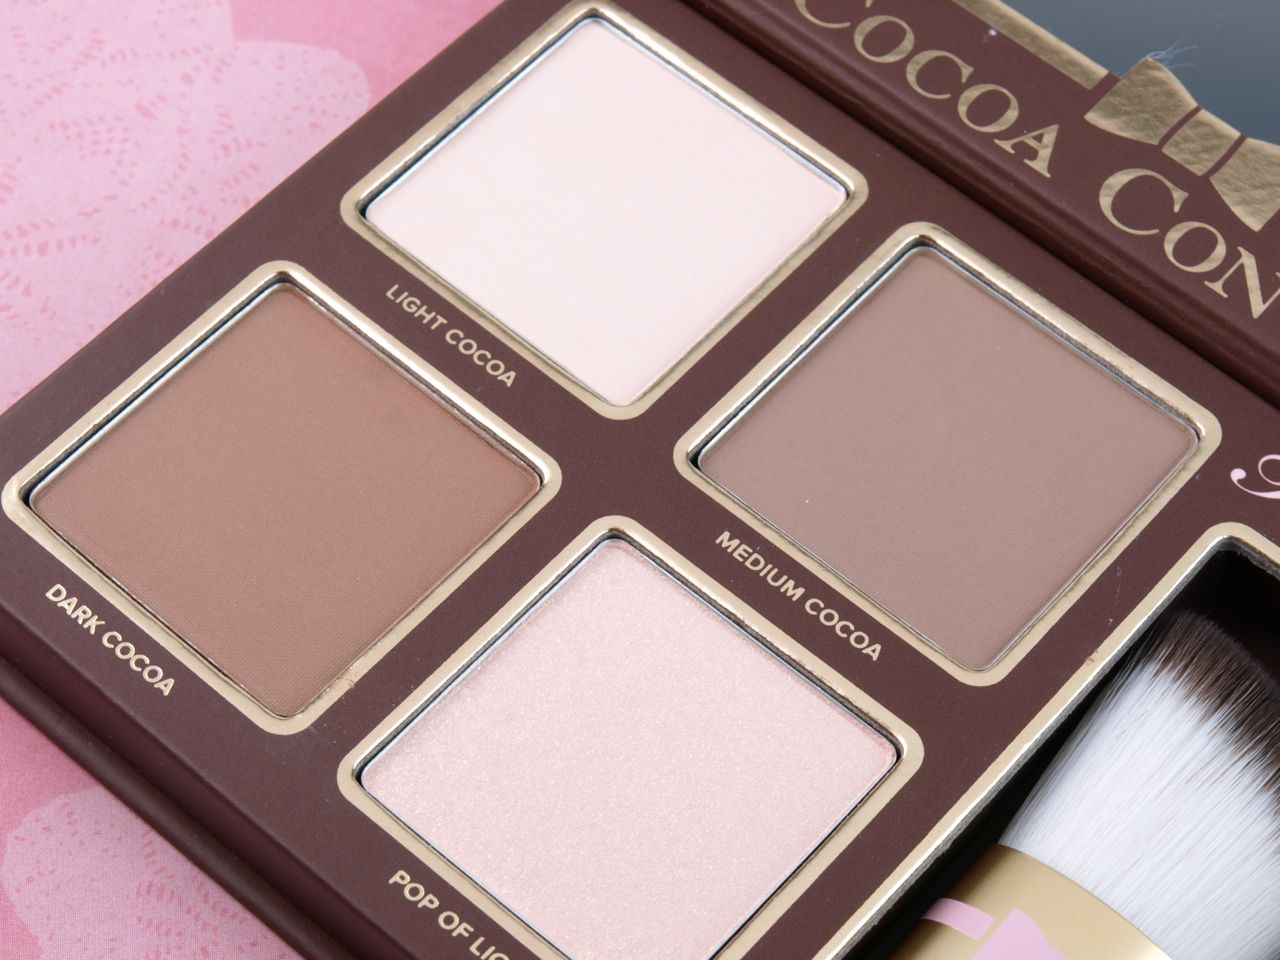 Too Faced Cocoa Contour Chiseled to Perfection Palette: Review and Swatches